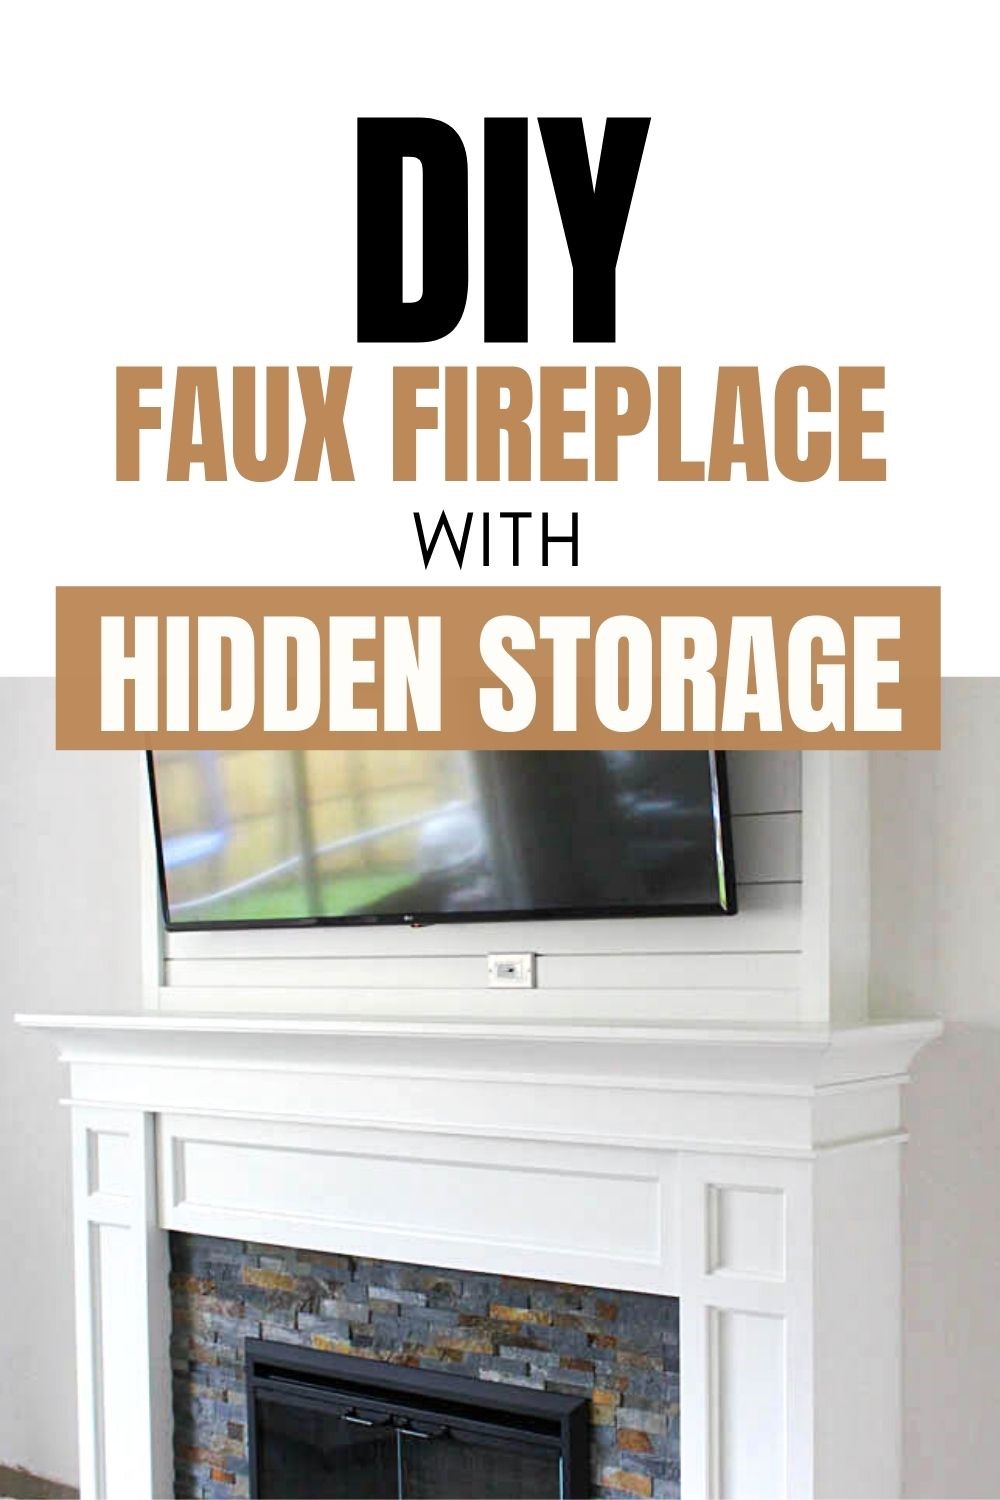 DIY FAUX FIREPLACE WITH HIDDEN STORAGE PART 3